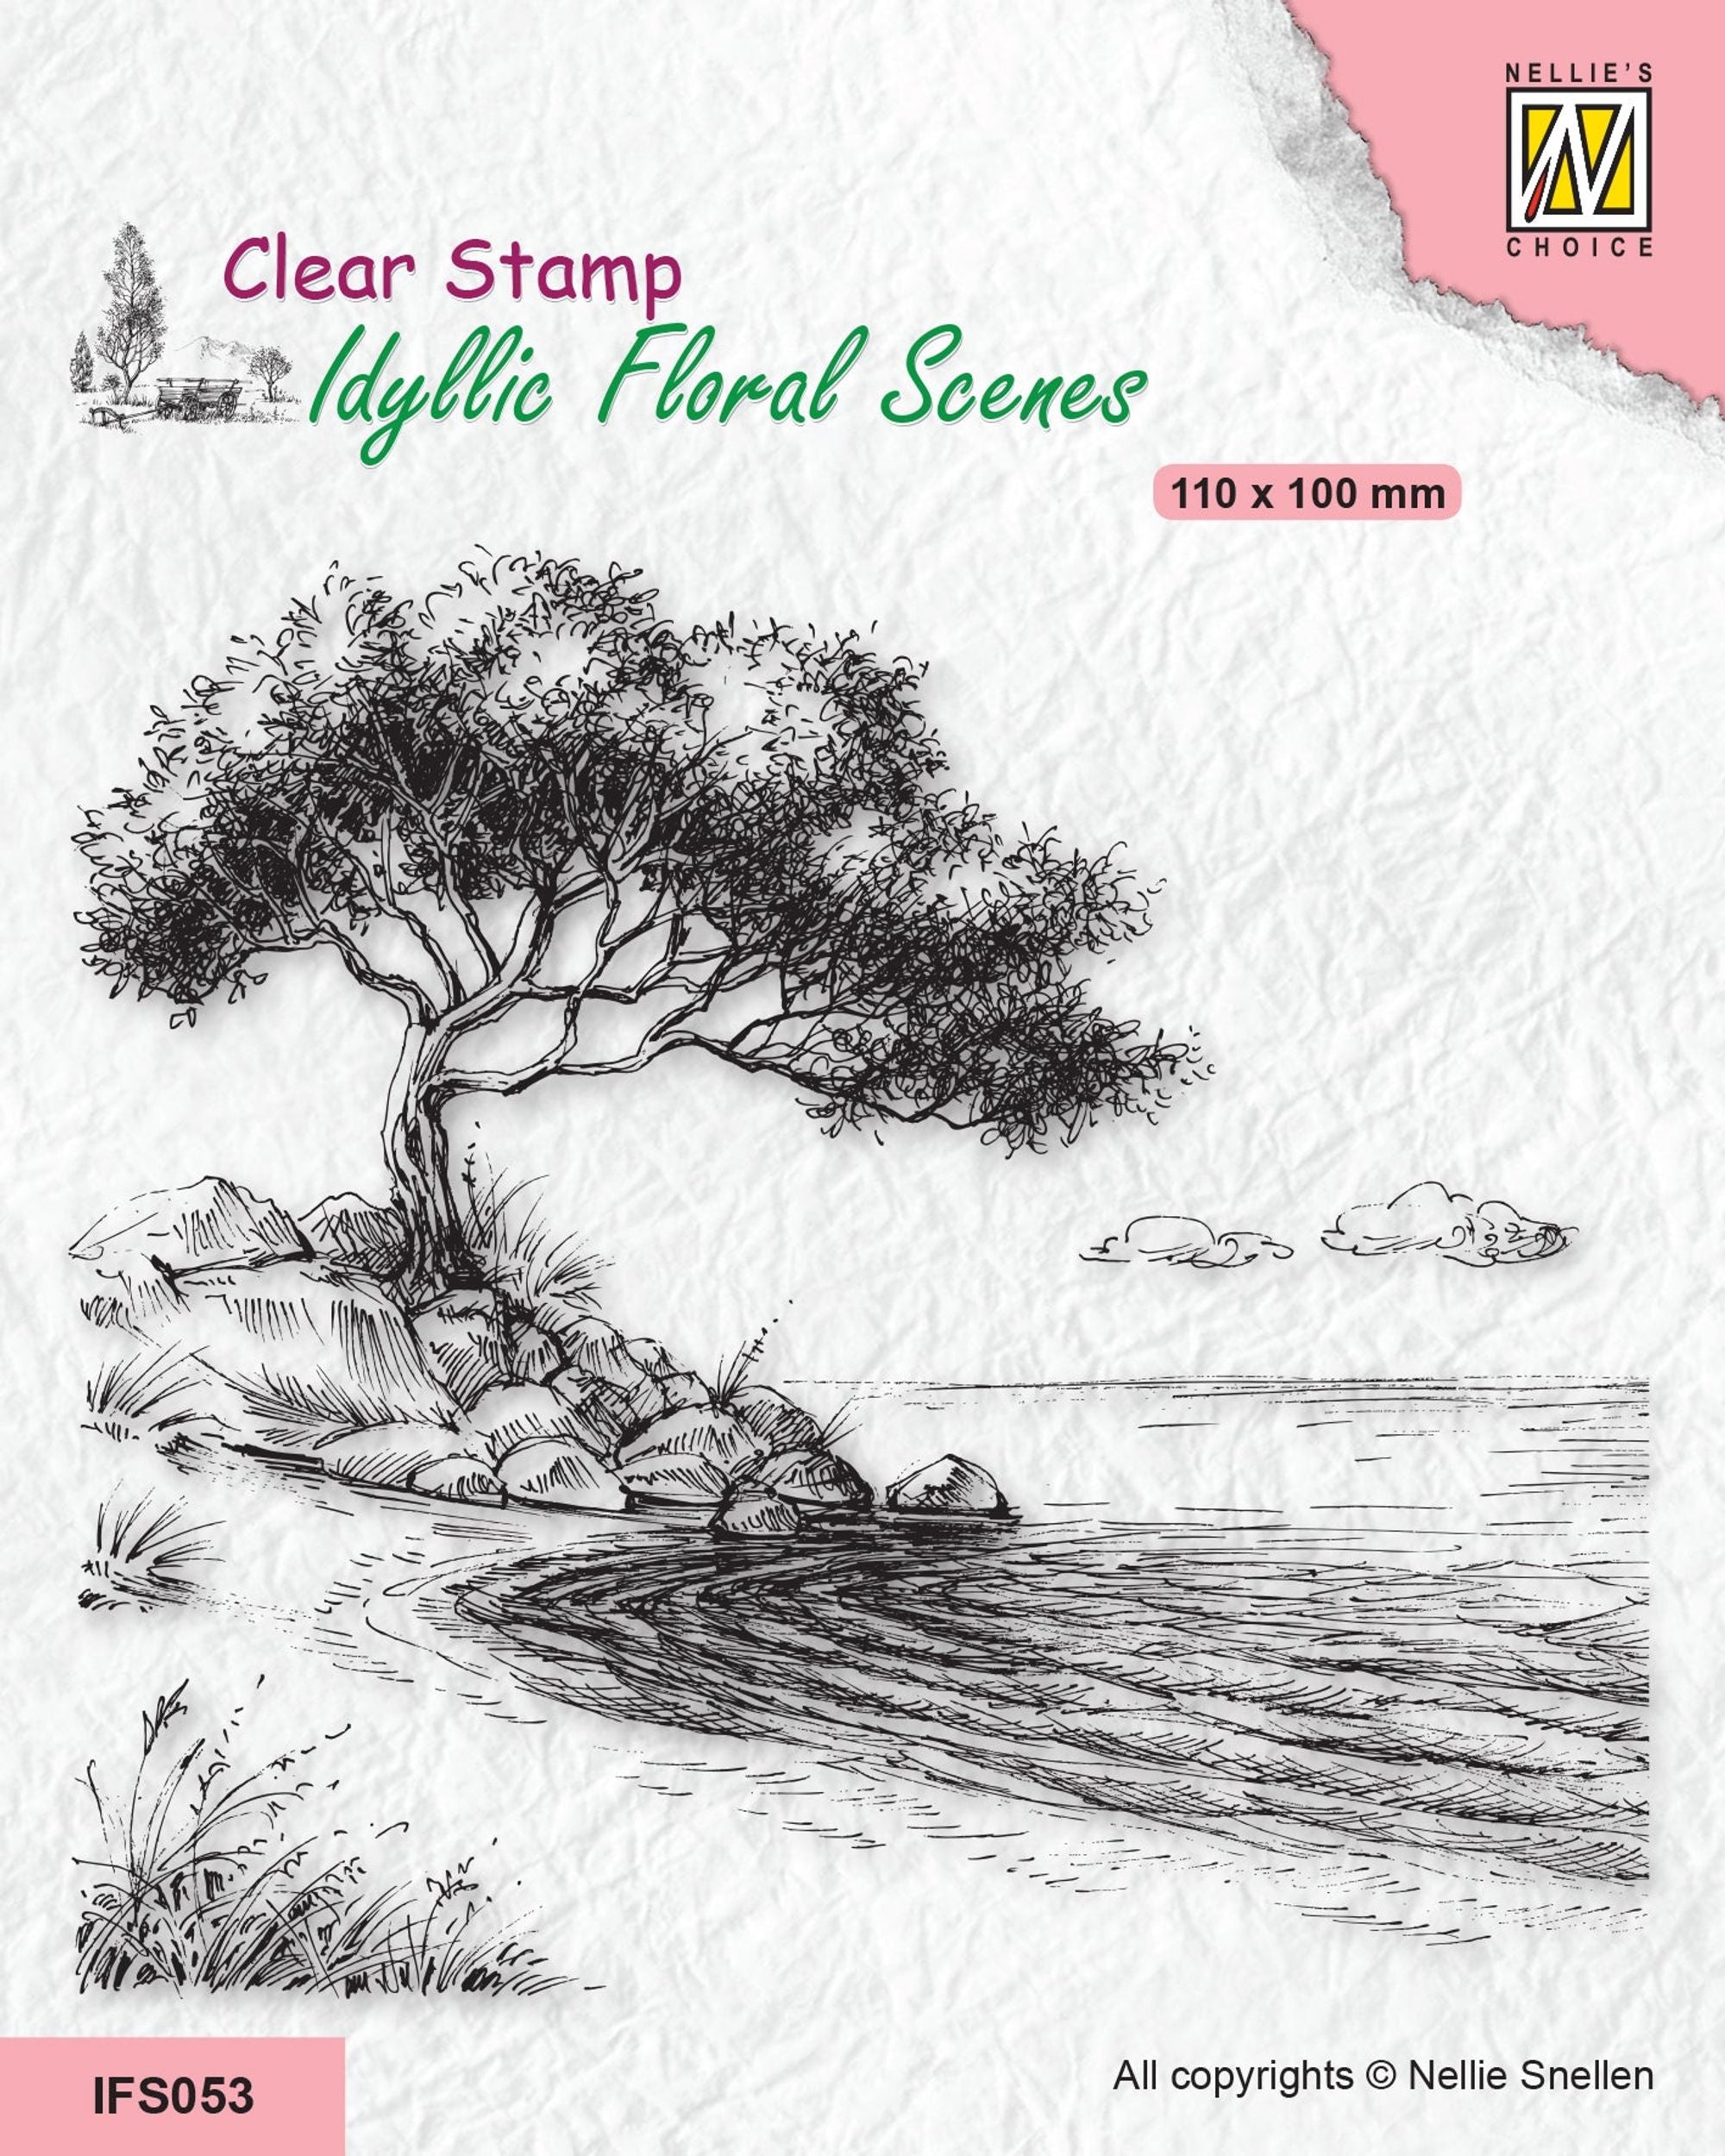 Nellie's Choice Clear Stamp Idyllic Floral Scene - Tree On Shore